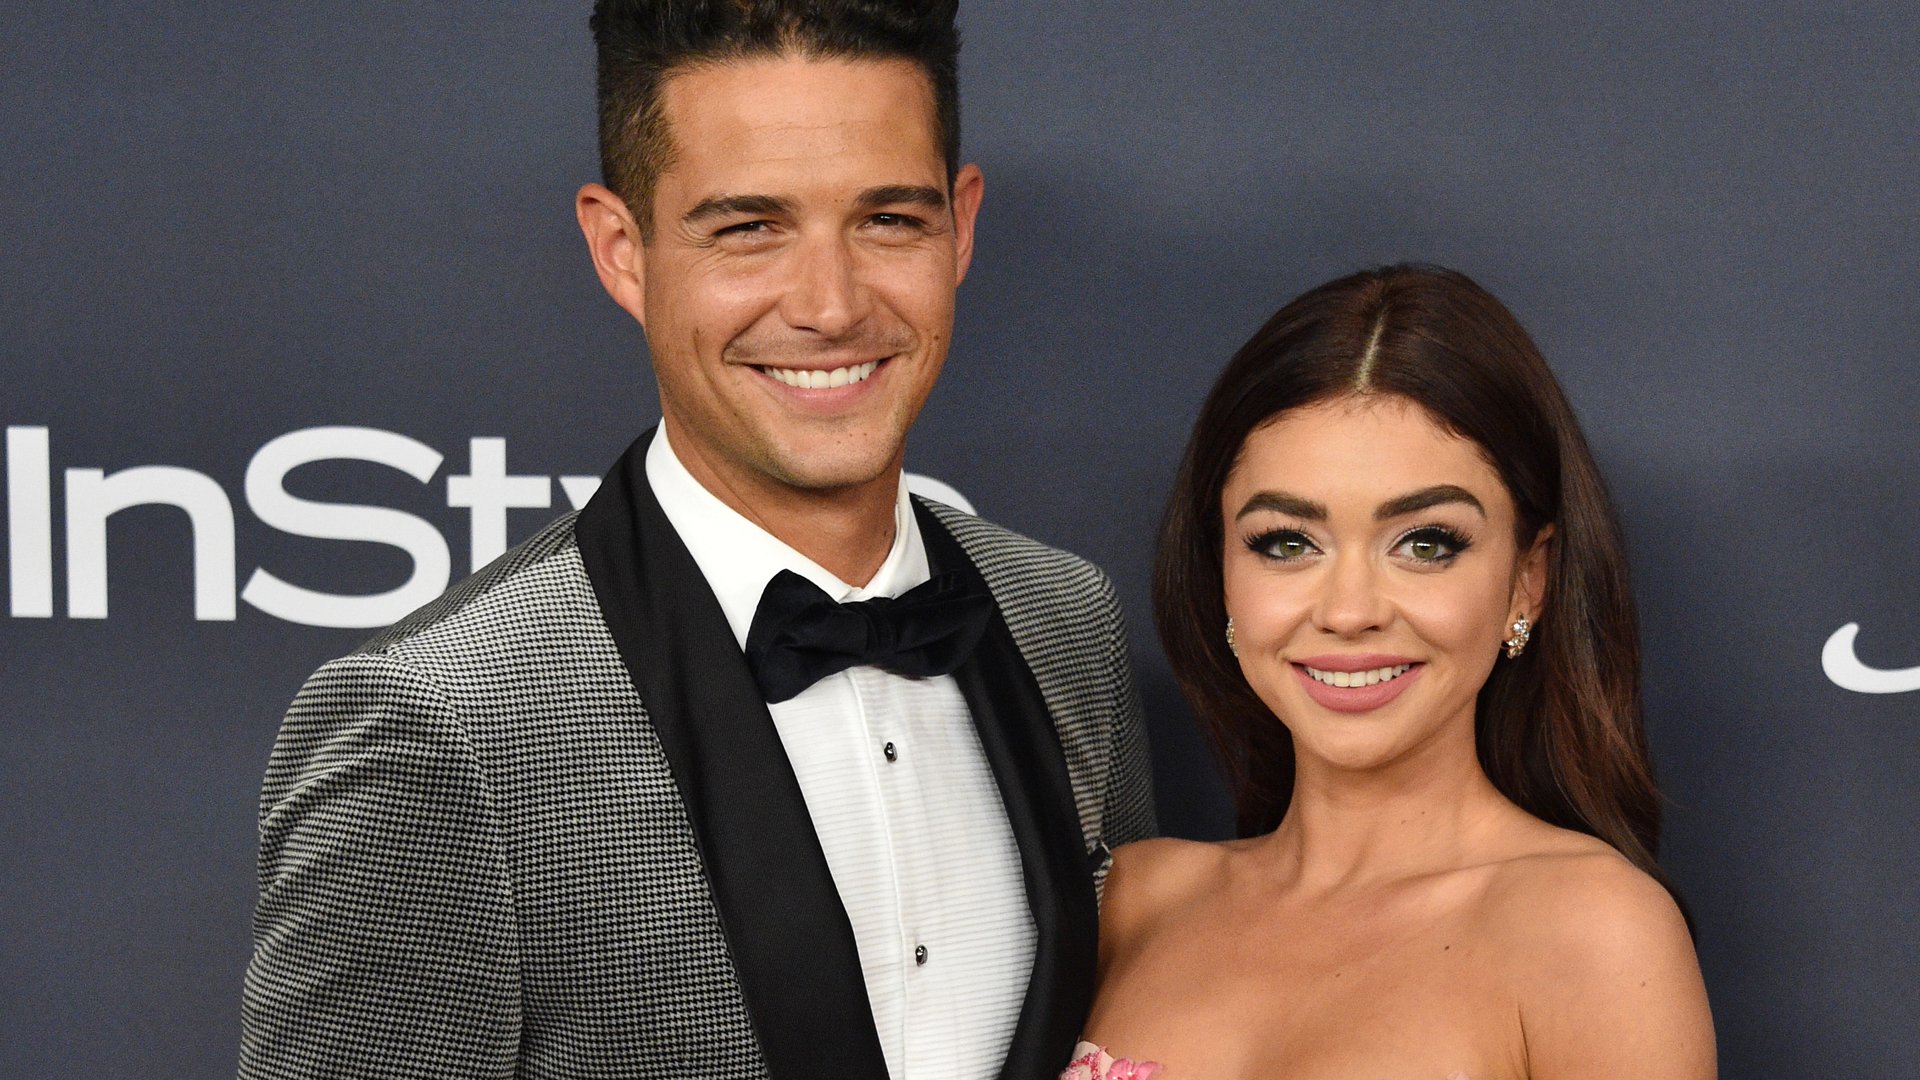 Is Wells Adams Married or Engaged After ‘The Bachelorette’? The Reality Star Found Love With Sarah Hyland